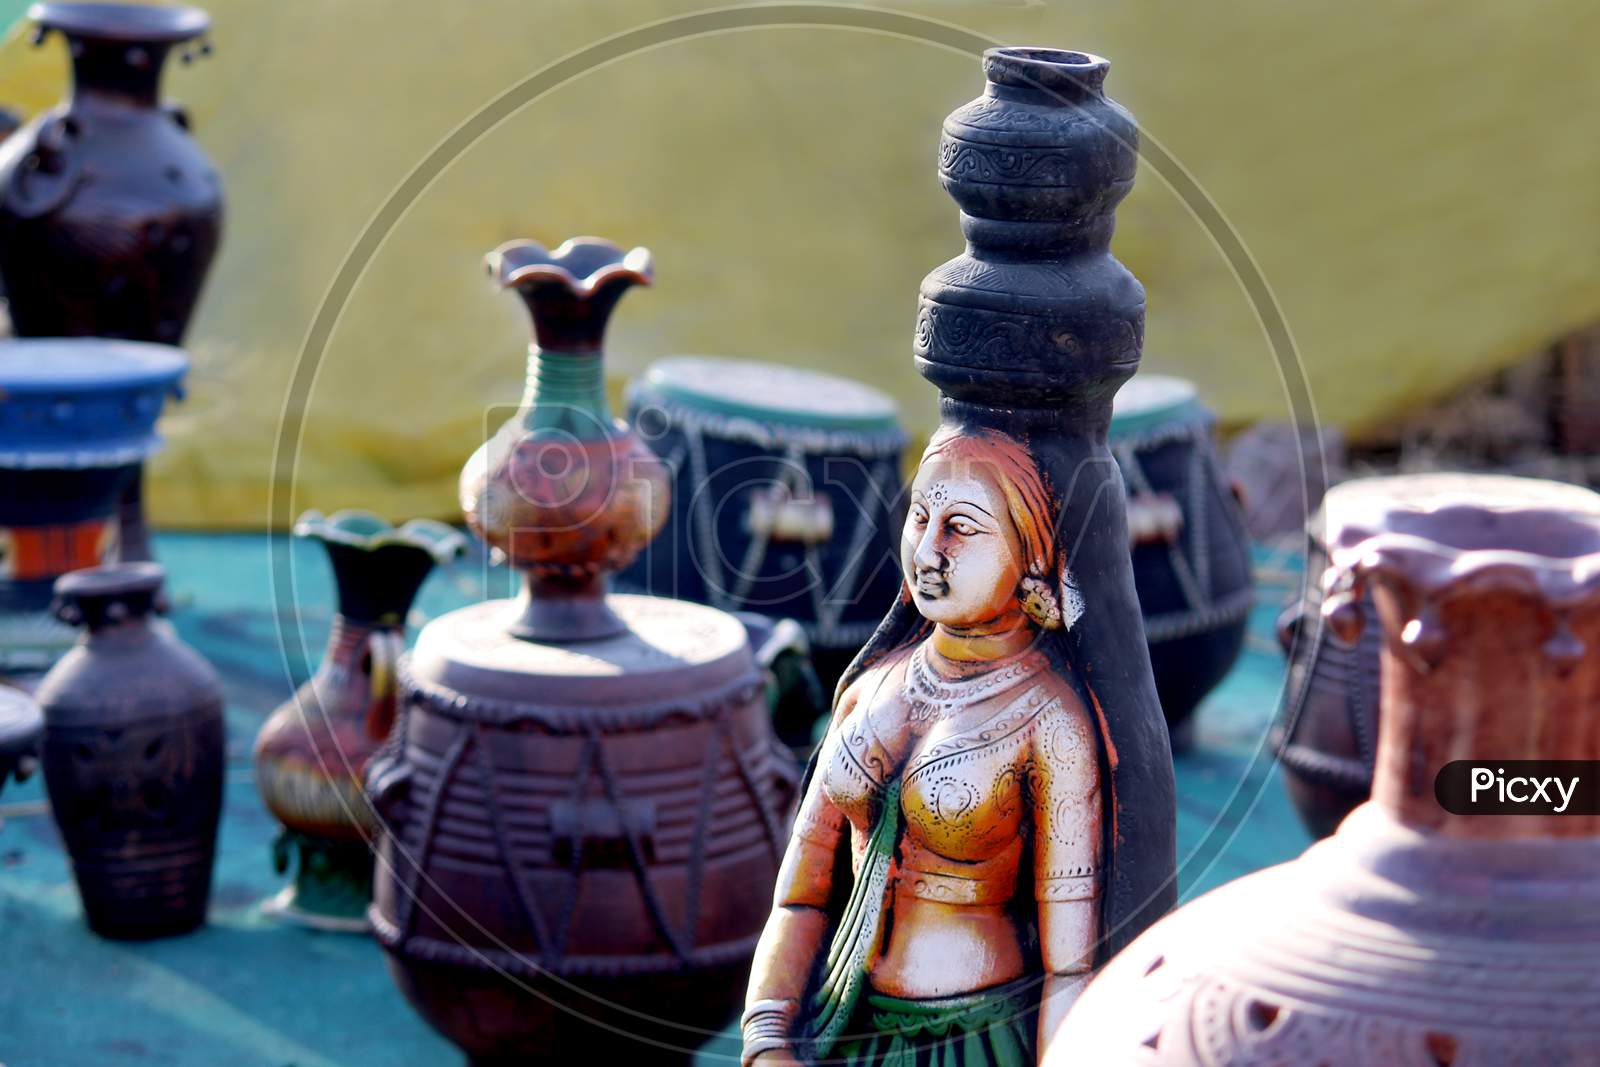 Home Decorative Items Of Earthenware Or Ceramic at a Vendor Stall